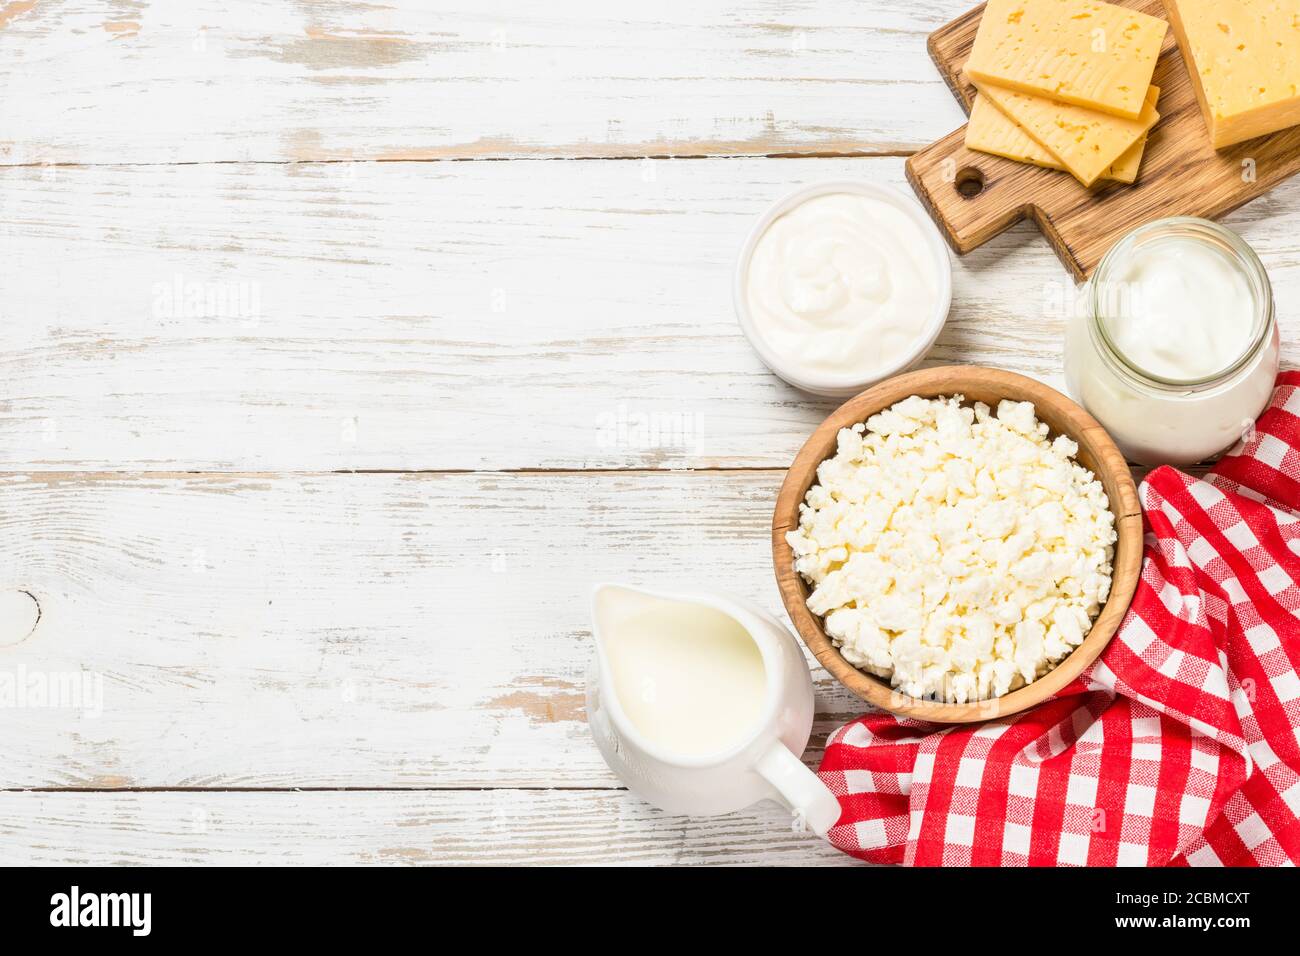 Dairy product at white wooden table. Stock Photo